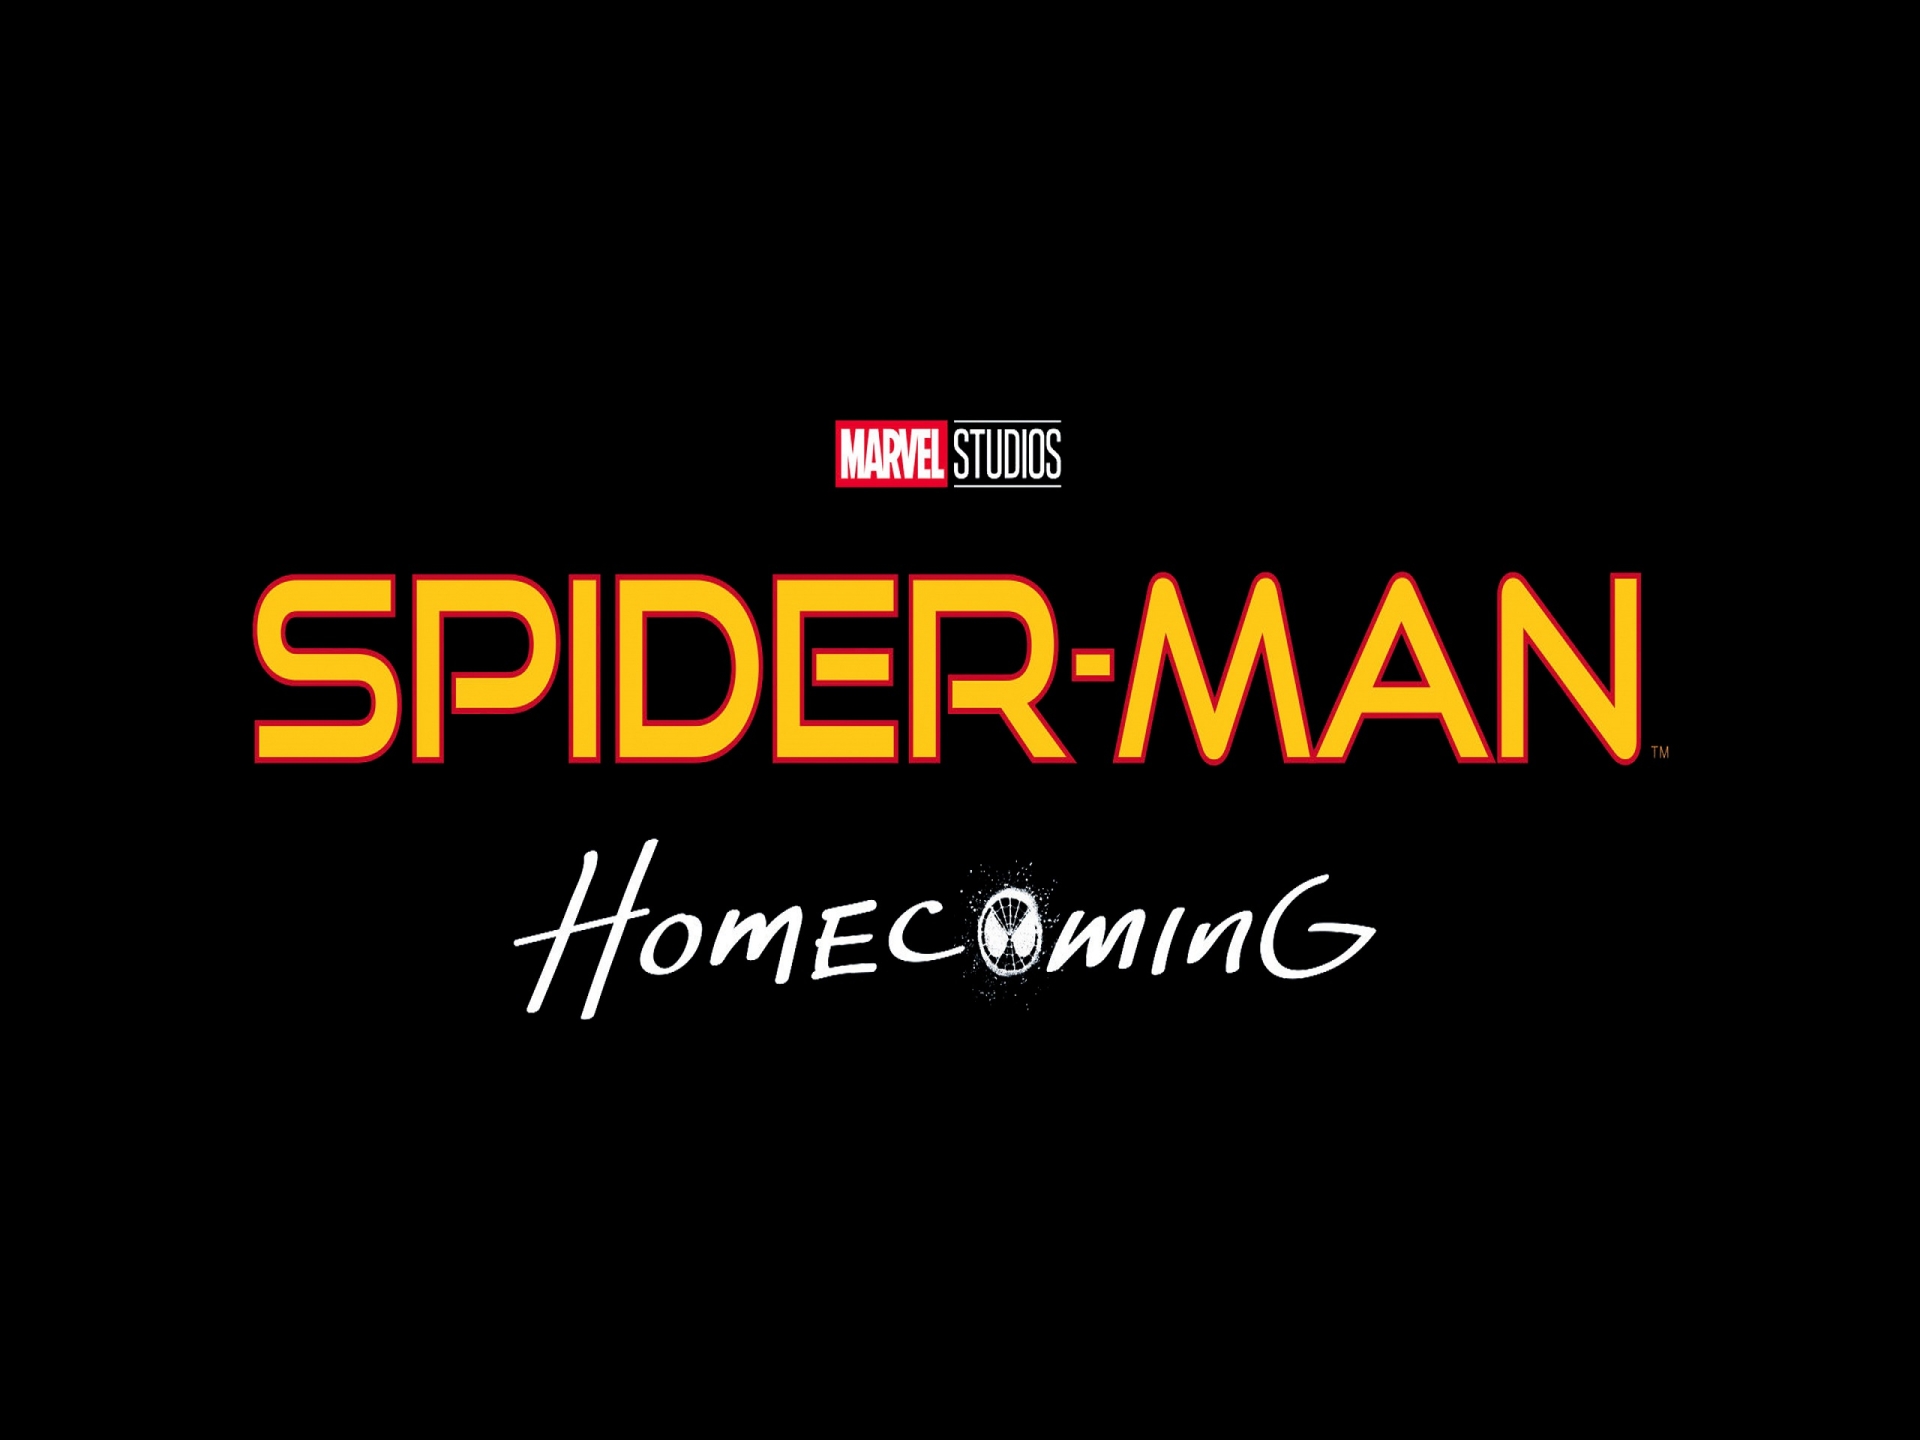 Spiderman Homecoming 2017 for 1920 x 1440 resolution